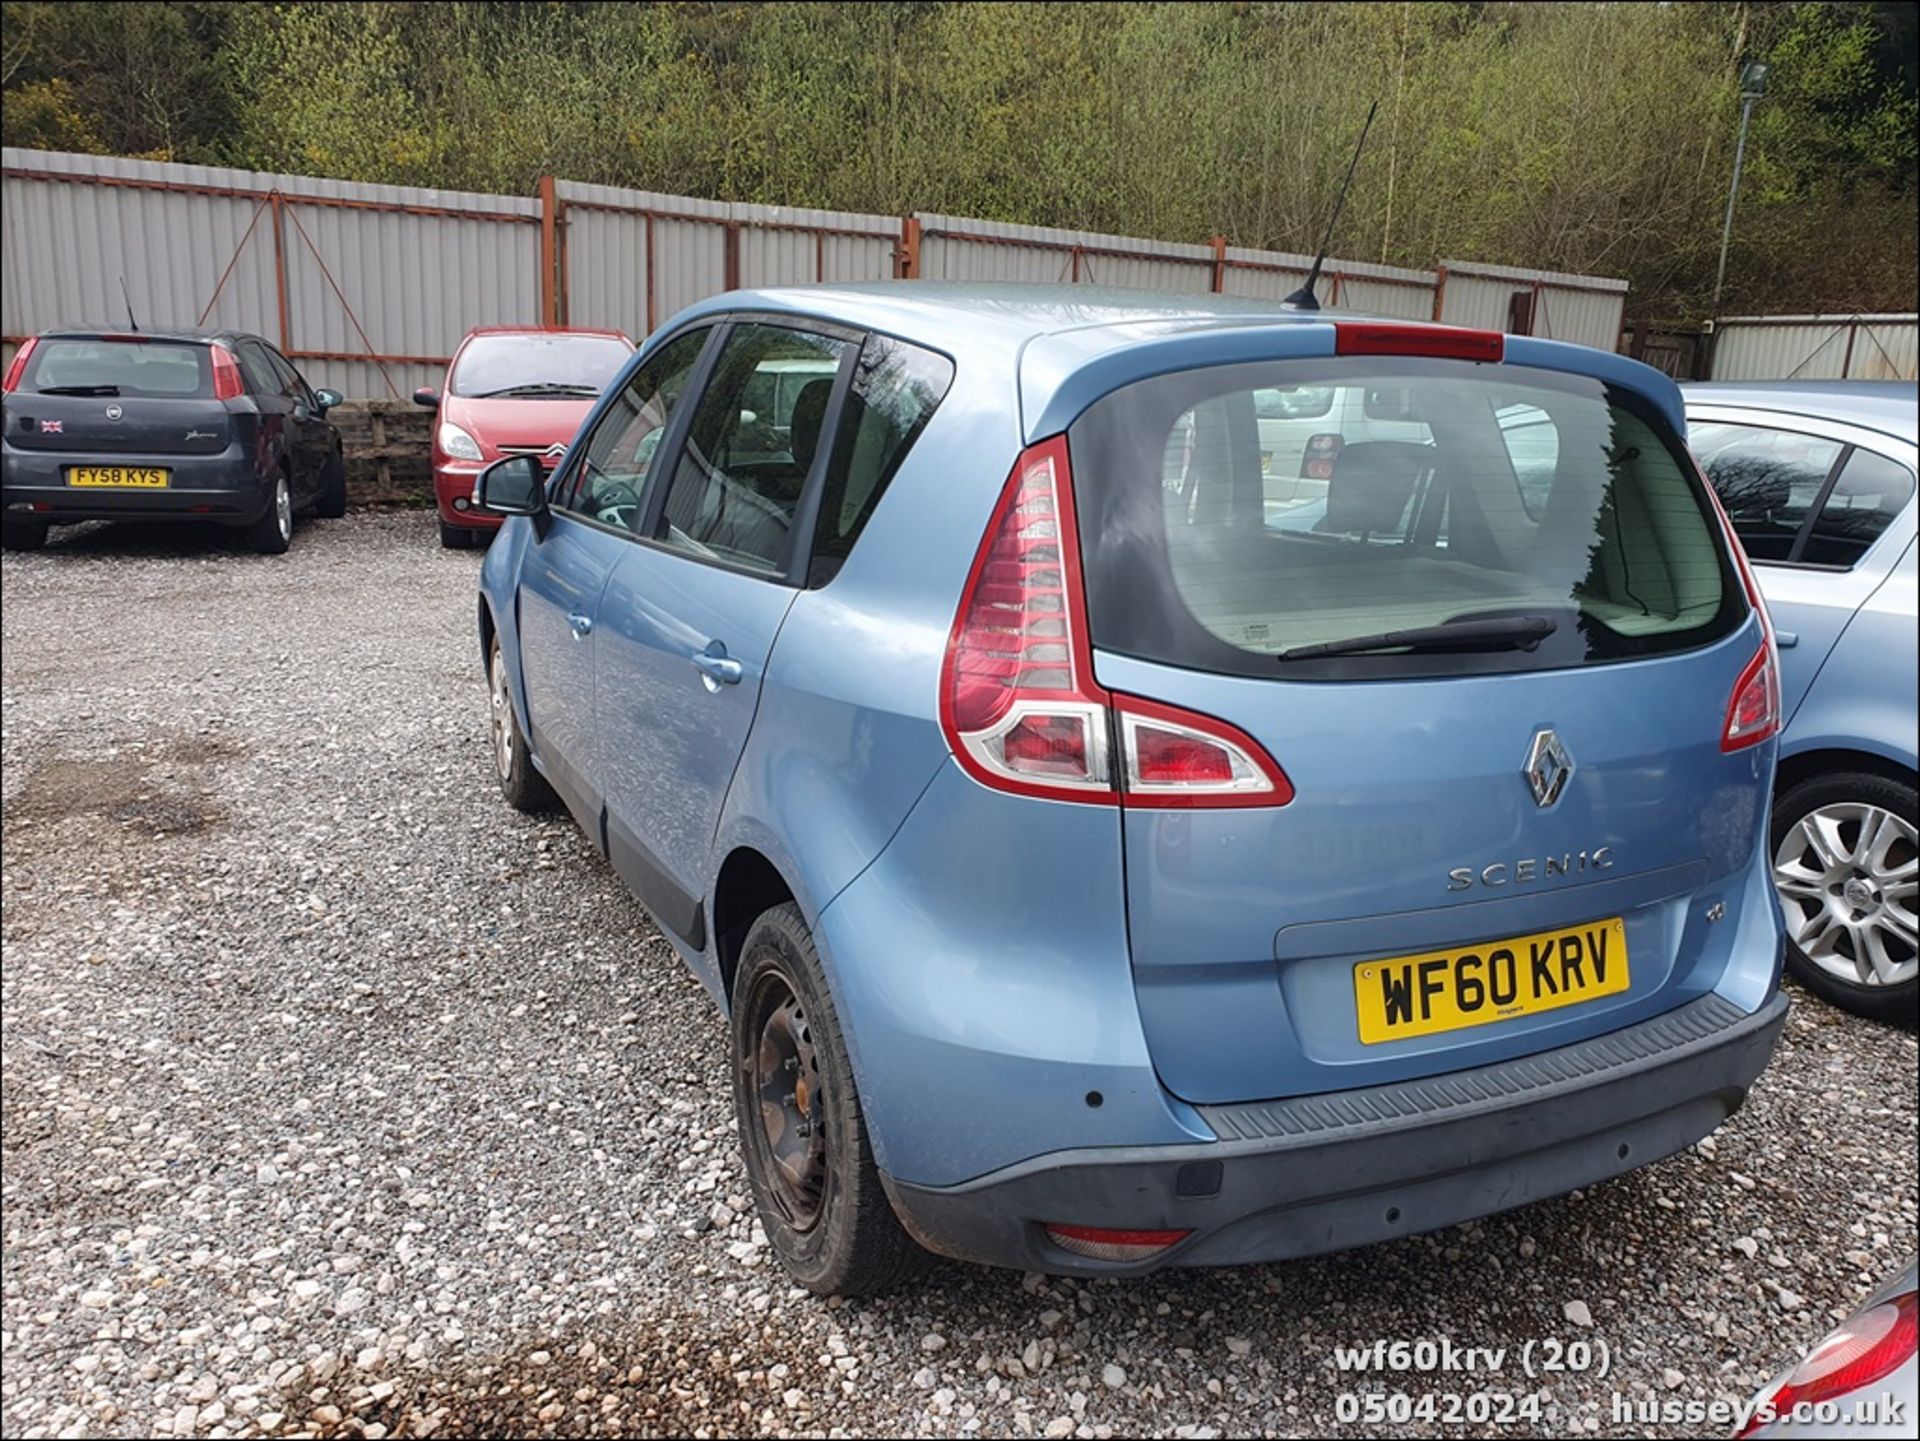 10/60 RENAULT SCENIC EXPRESSION DCI 105 - 1461cc 5dr MPV (Blue) - Image 21 of 50